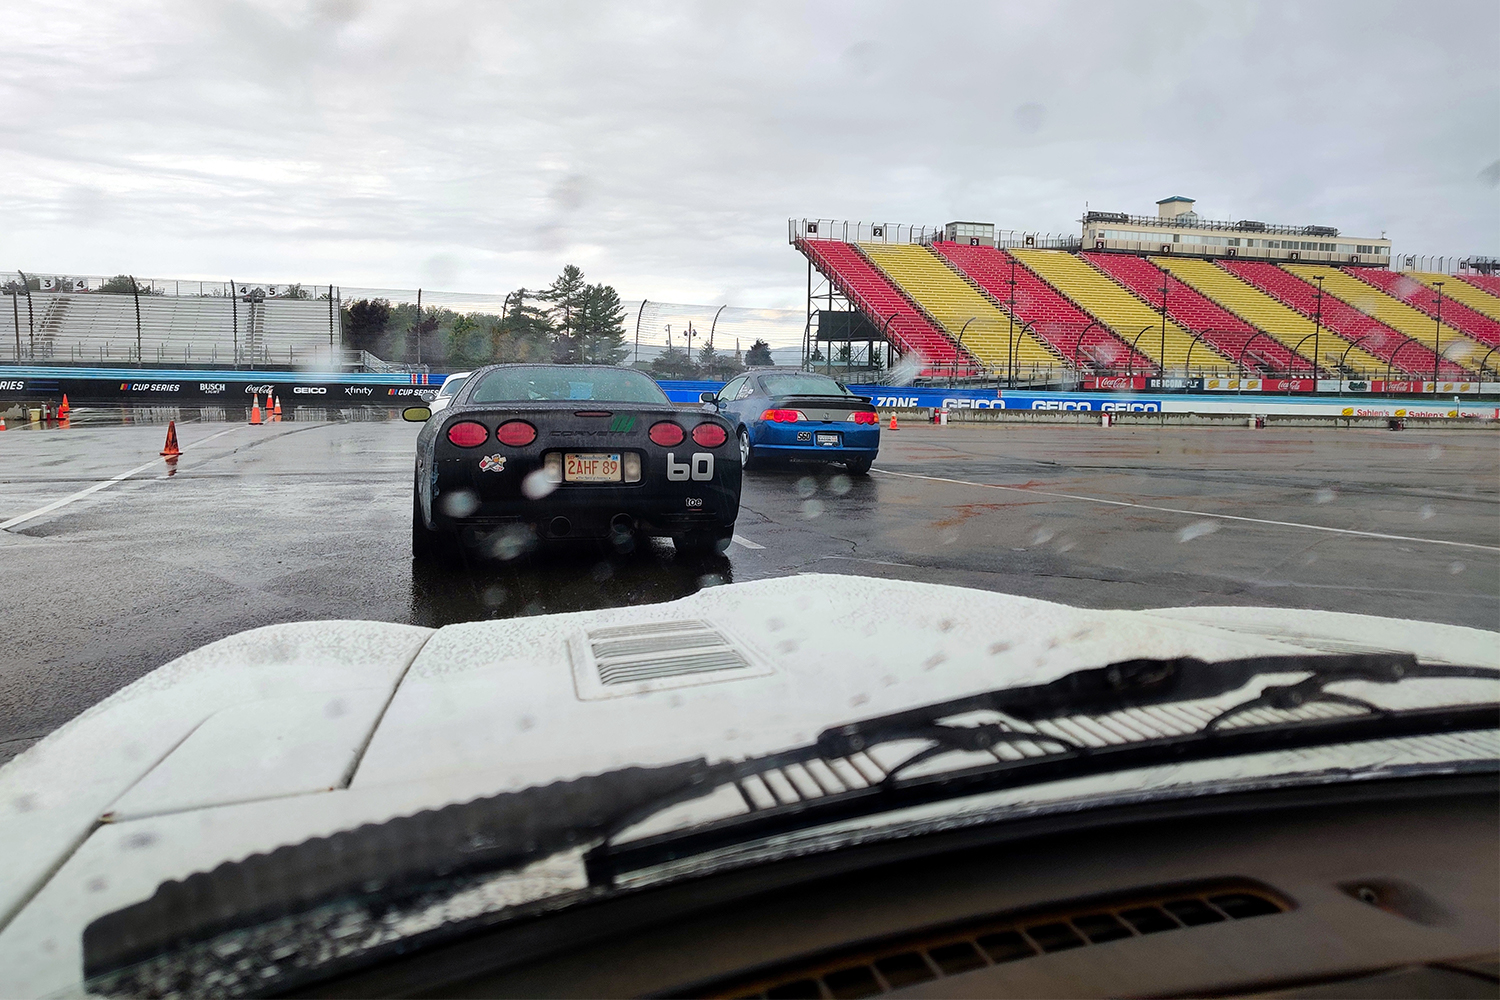 Rain on the windshield of a race car heading out to the track at Watkins Glen International racetrack in New York